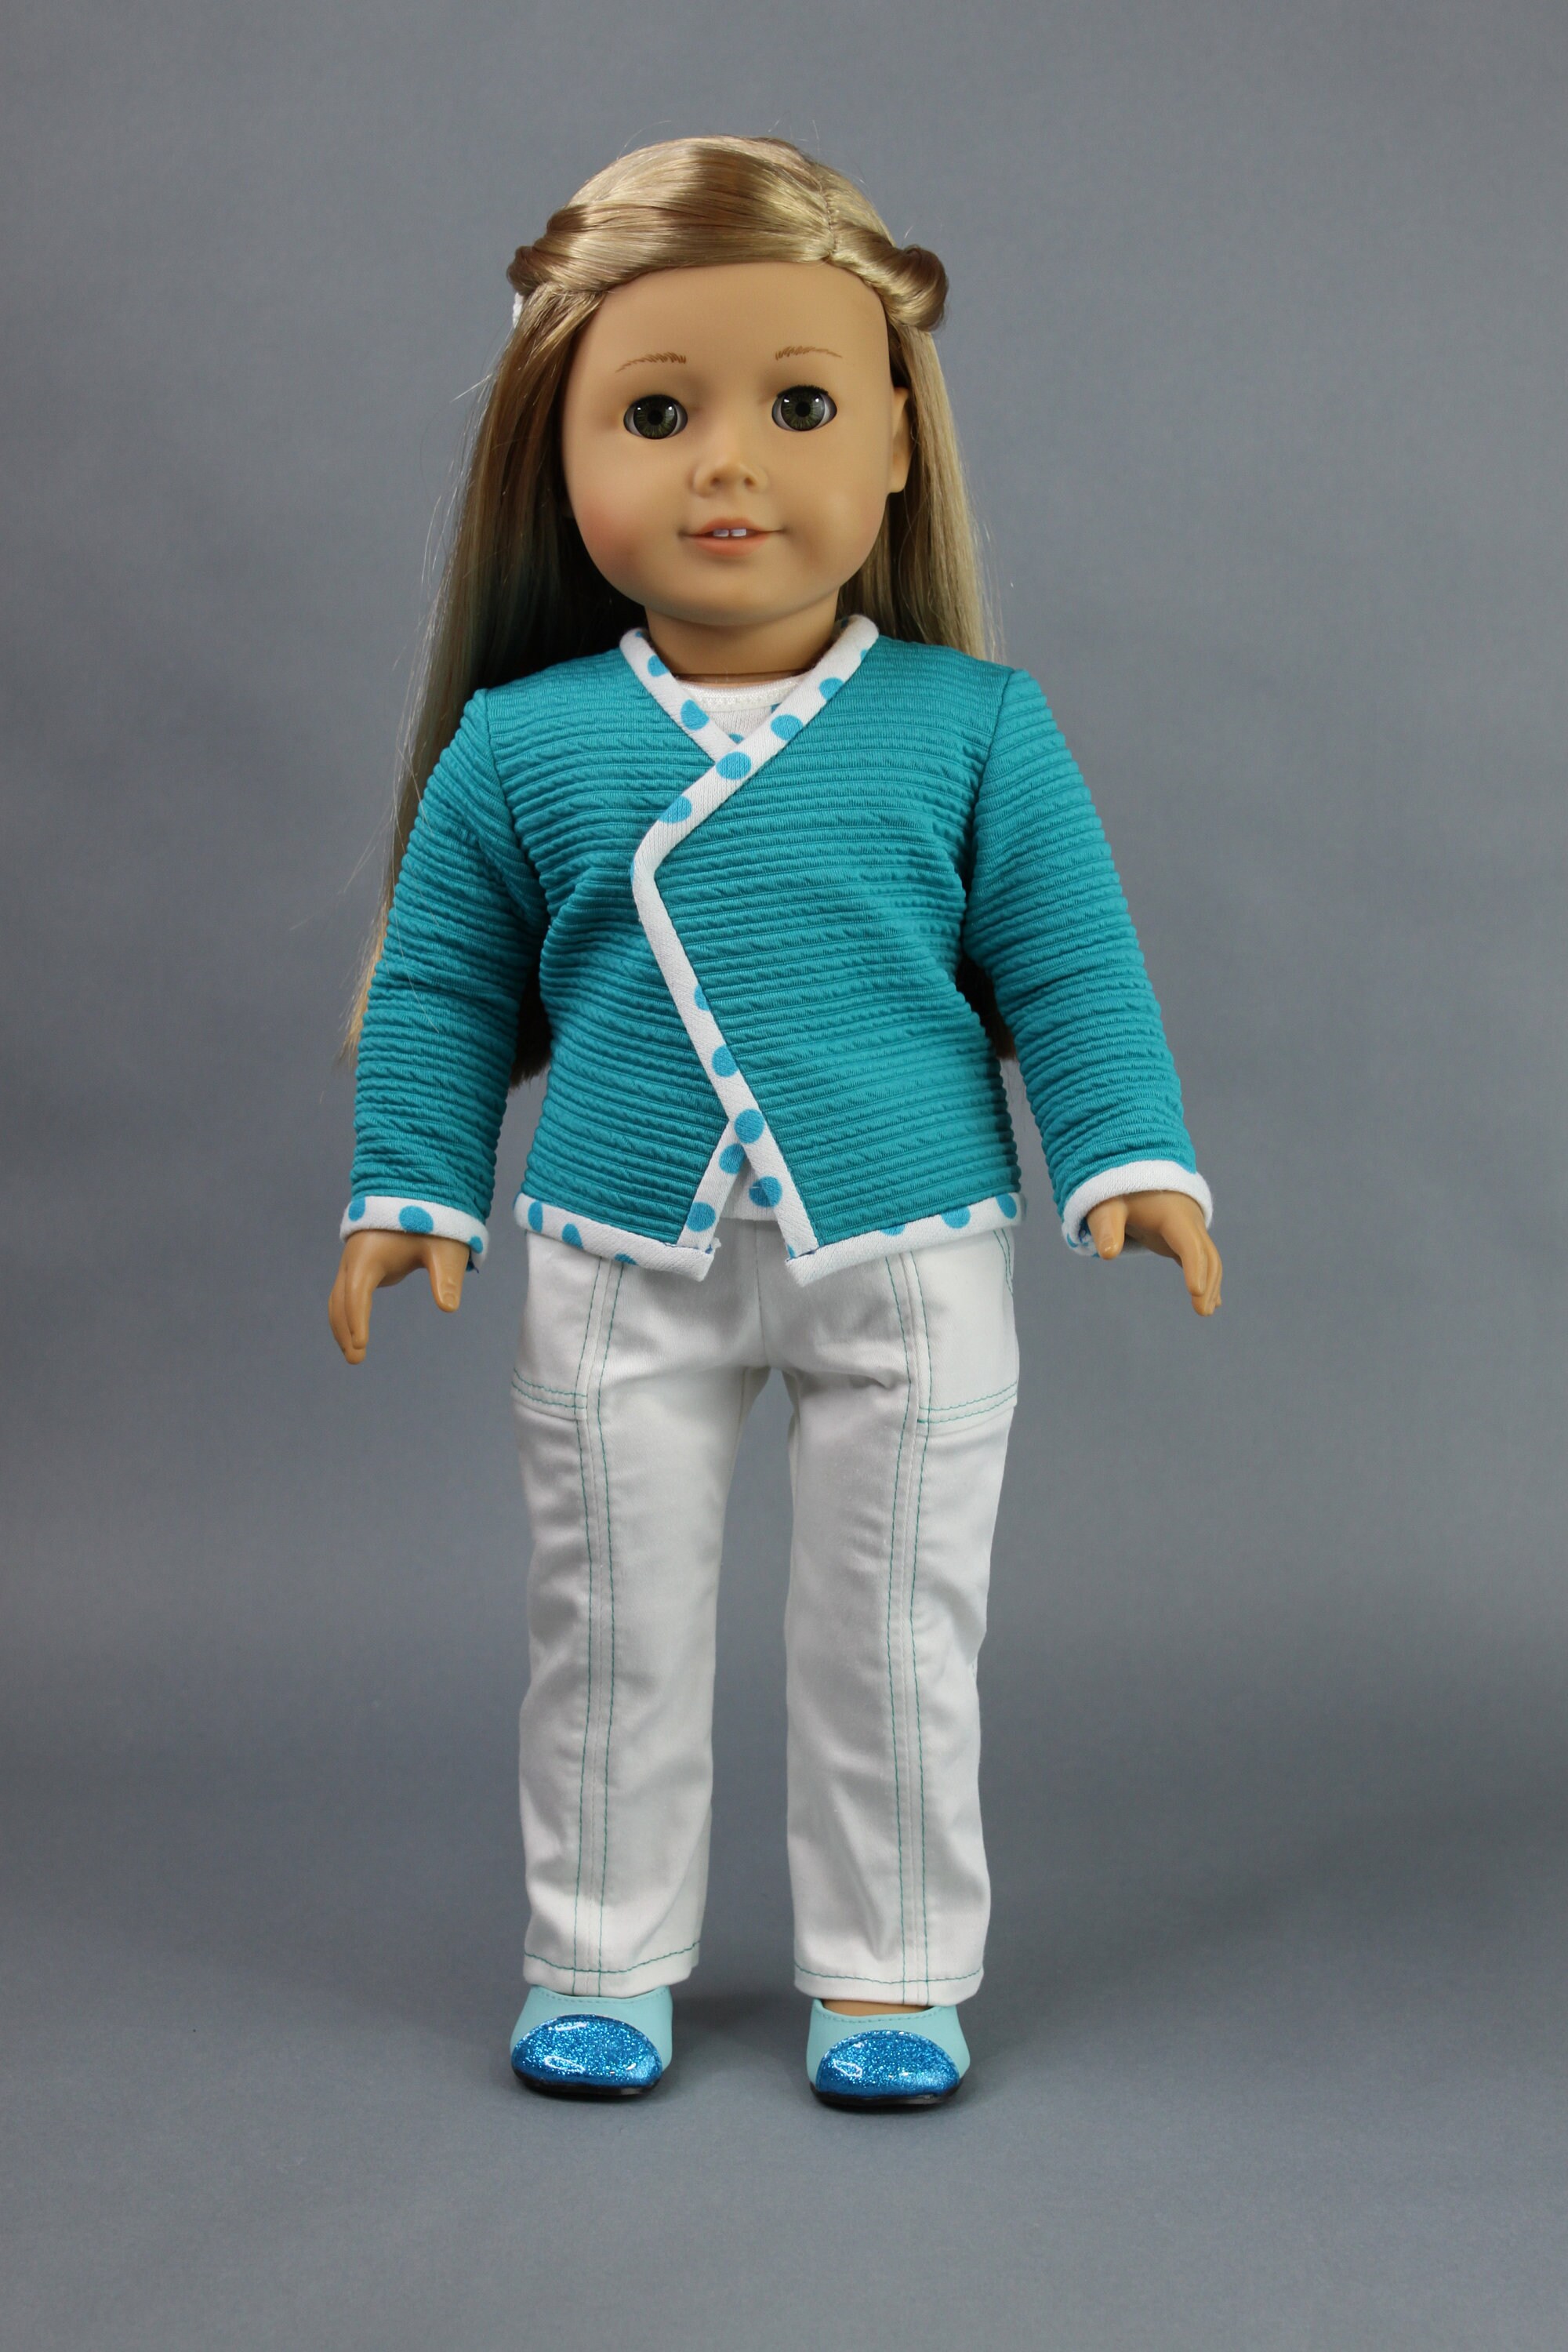 Wrap Cardigan and Boot Cut Jeans for 18 inch dolls such as AG | Etsy